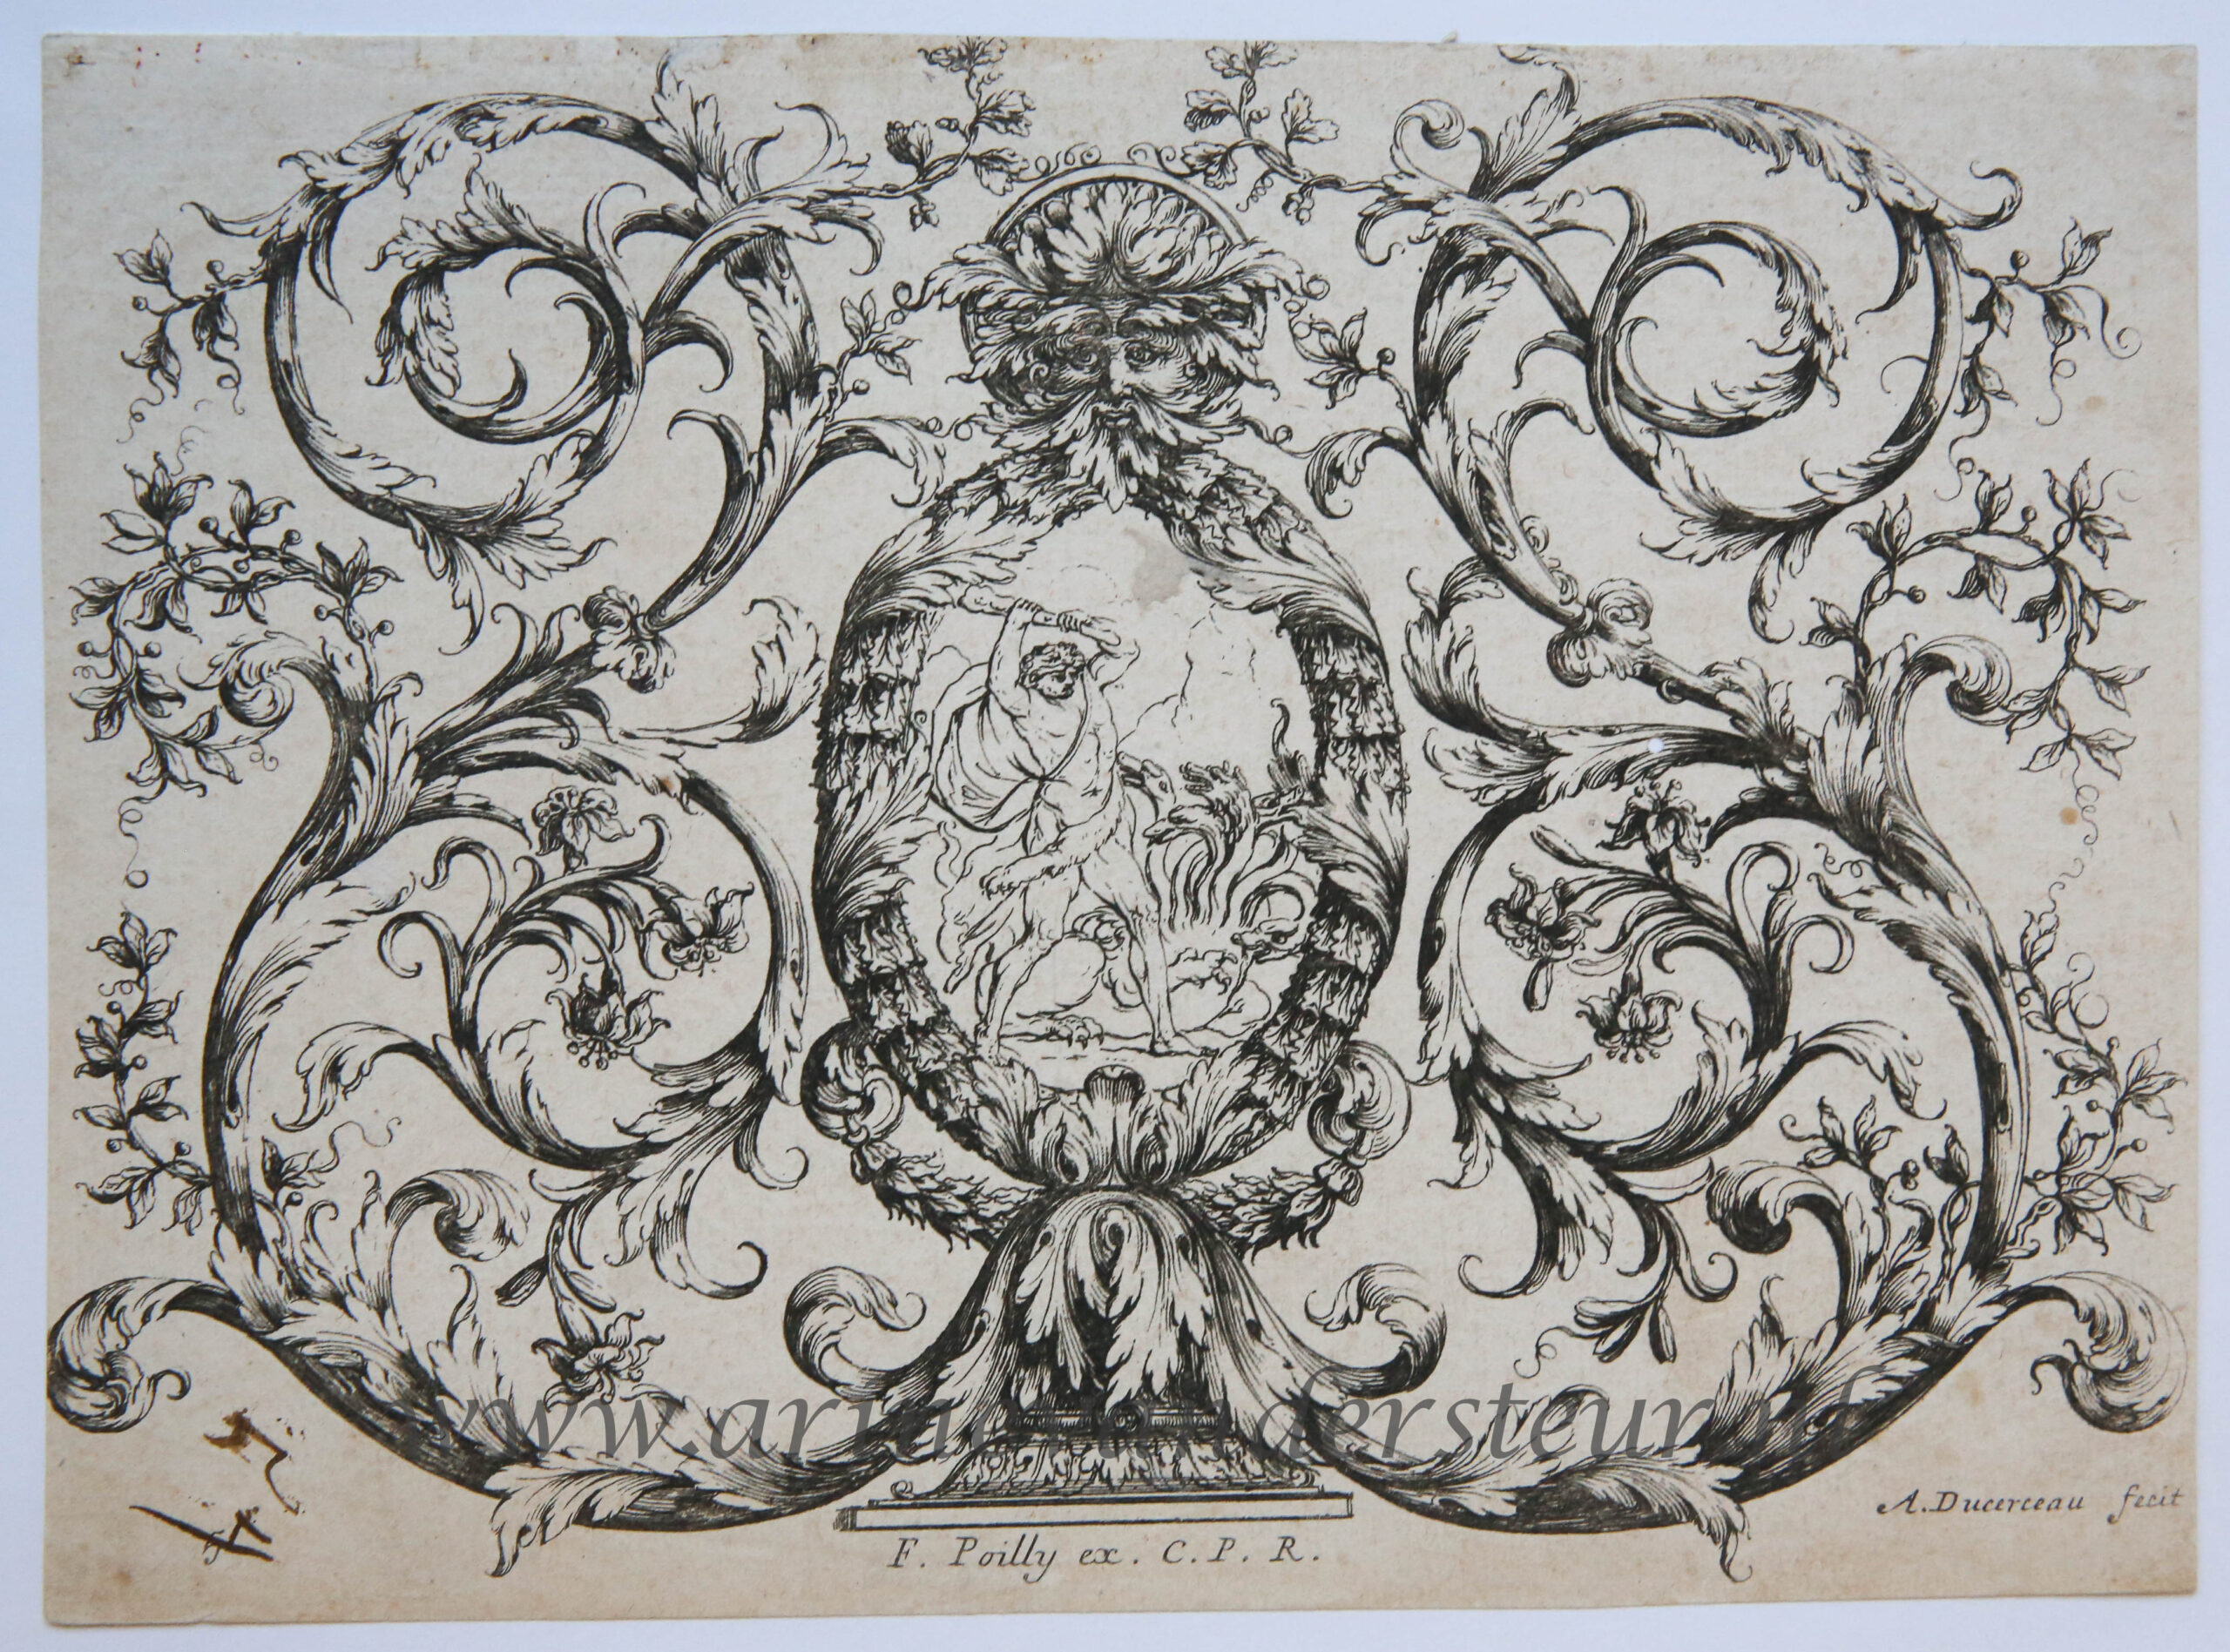 [Antique ornament print, etching] Poilly, Duceurceau, Ornament print with Hercules and Hydra, published 17th century, 1 p.